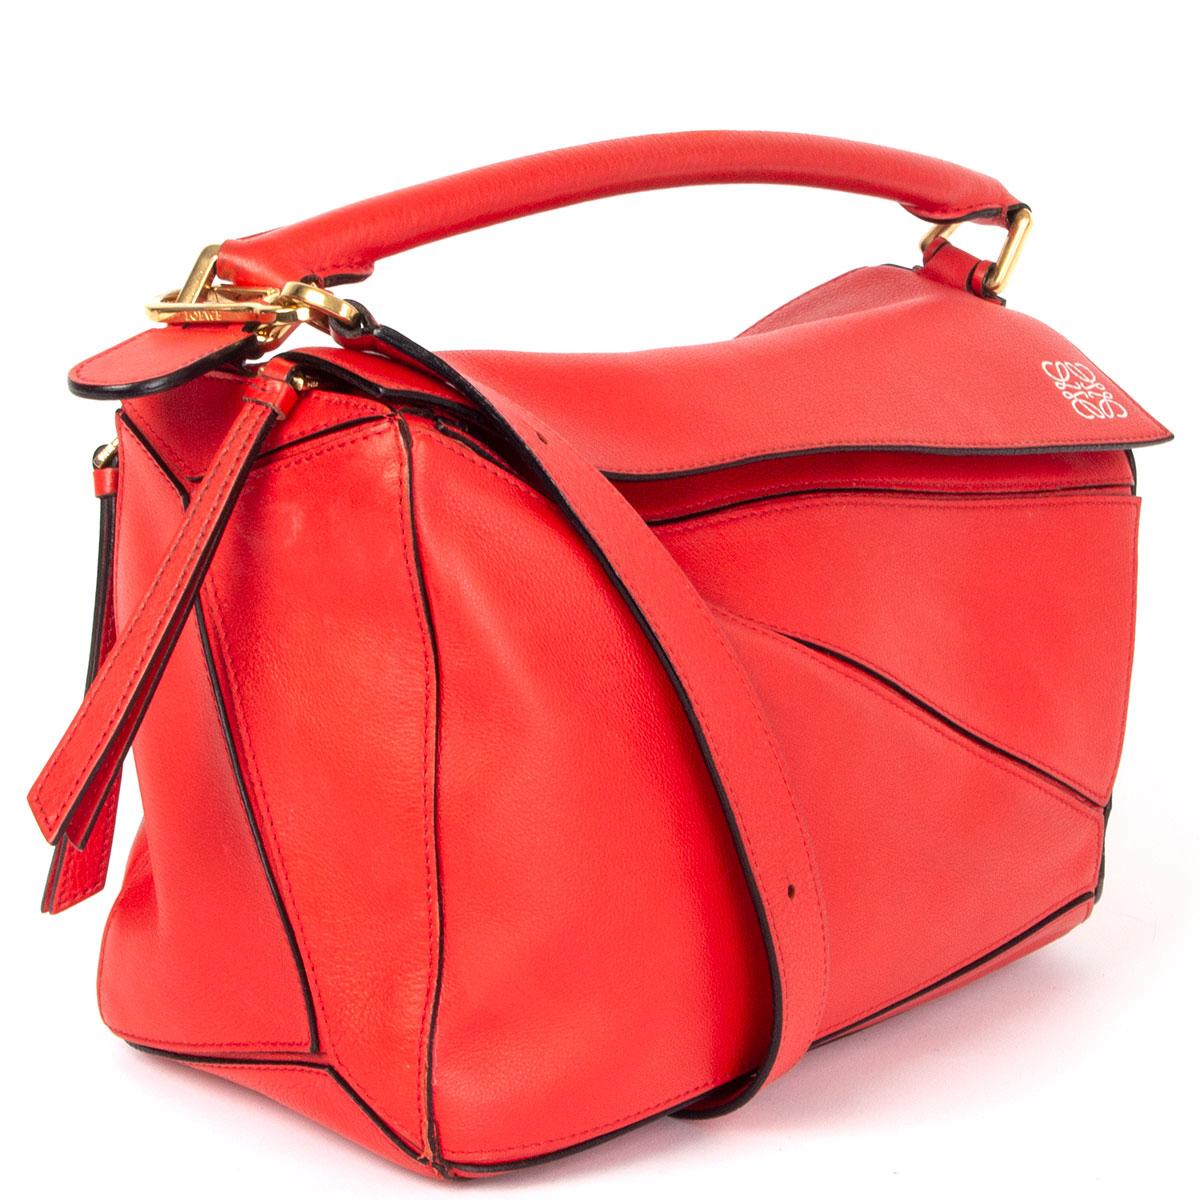 100% authentic Loewe 'Puzzle Medium' impeccably constructed shoulder bag in lipstick red calfskin. The concealed zip closure means the intricate composition of leather panels is left uninterrupted, while a cleverly placed pocket to the bag allows